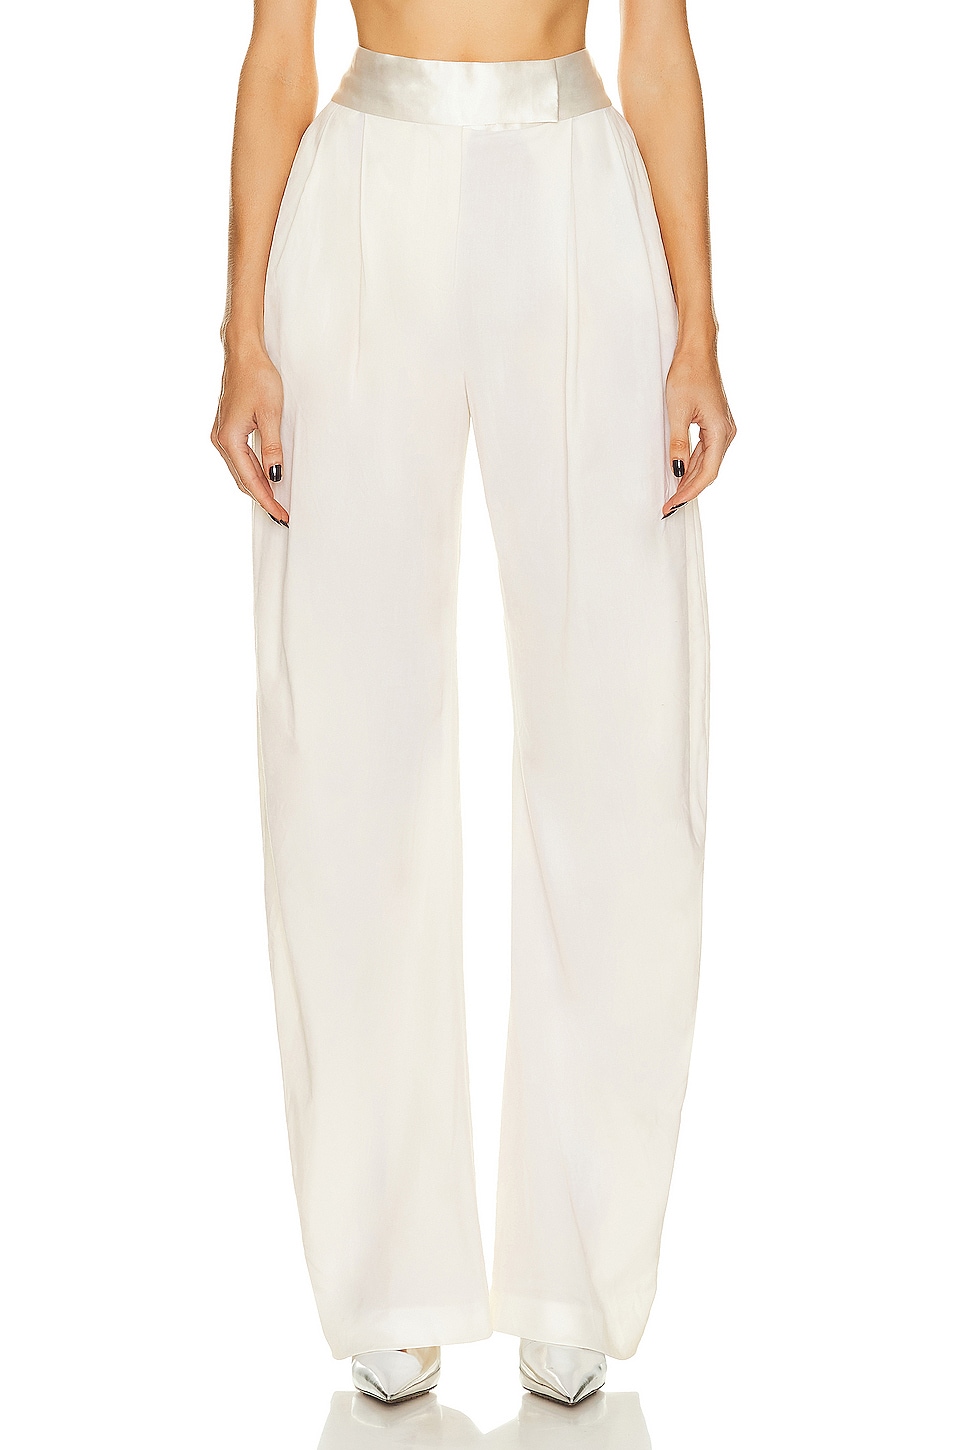 Image 1 of THE ATTICO Gary Long Pant in Milk